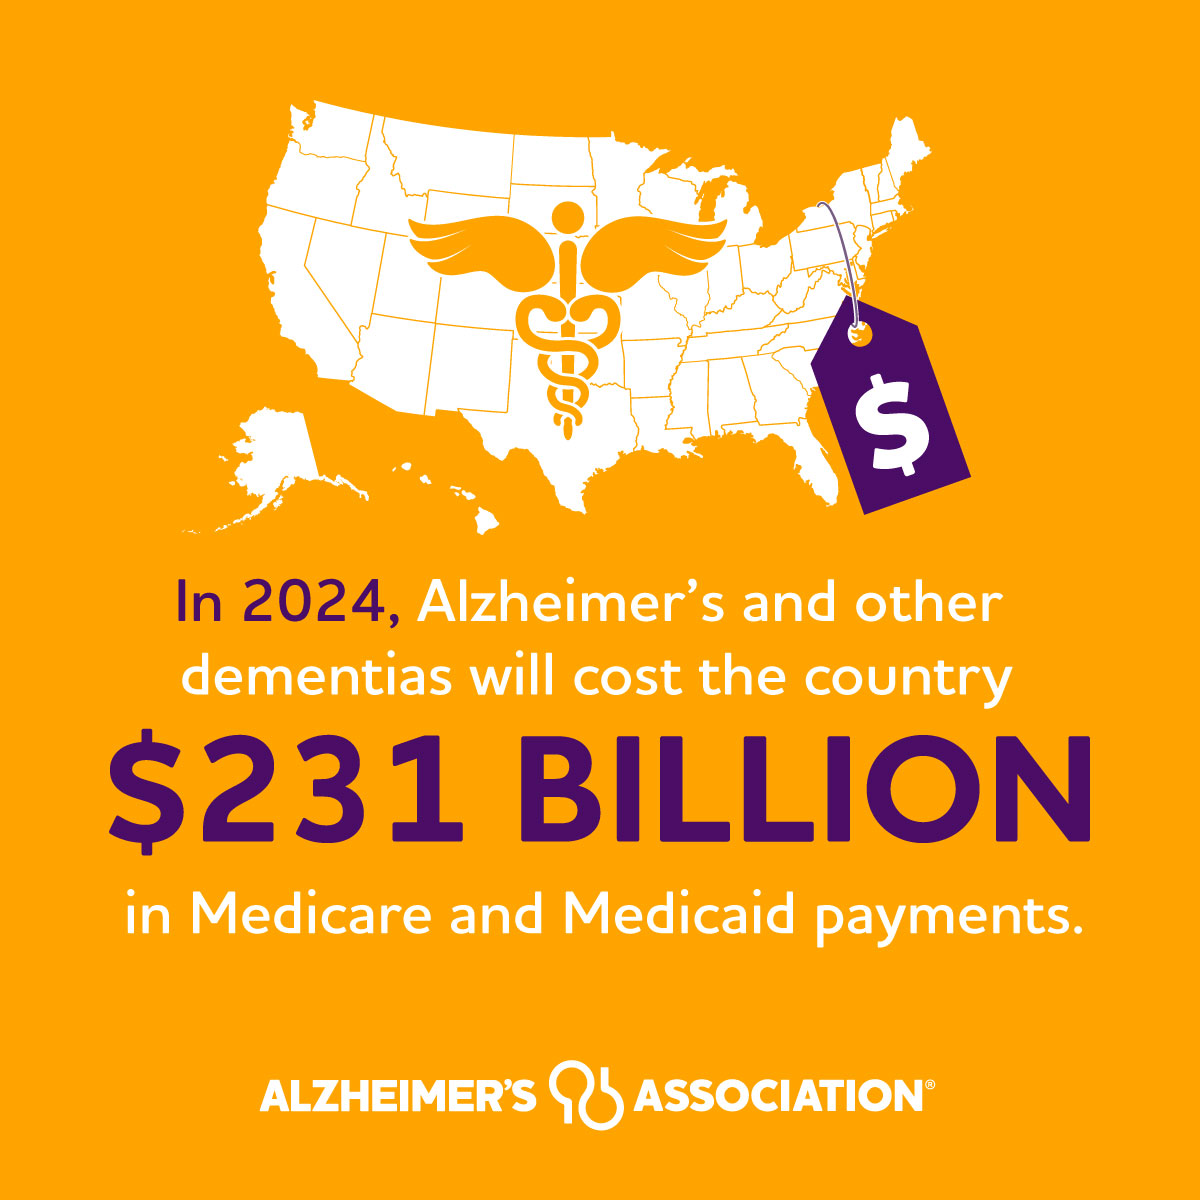 Alzheimer's is devastating Medicare and Medicaid. Share the facts: alz.org/facts. #AlzheimersInAmerica #ENDALZ